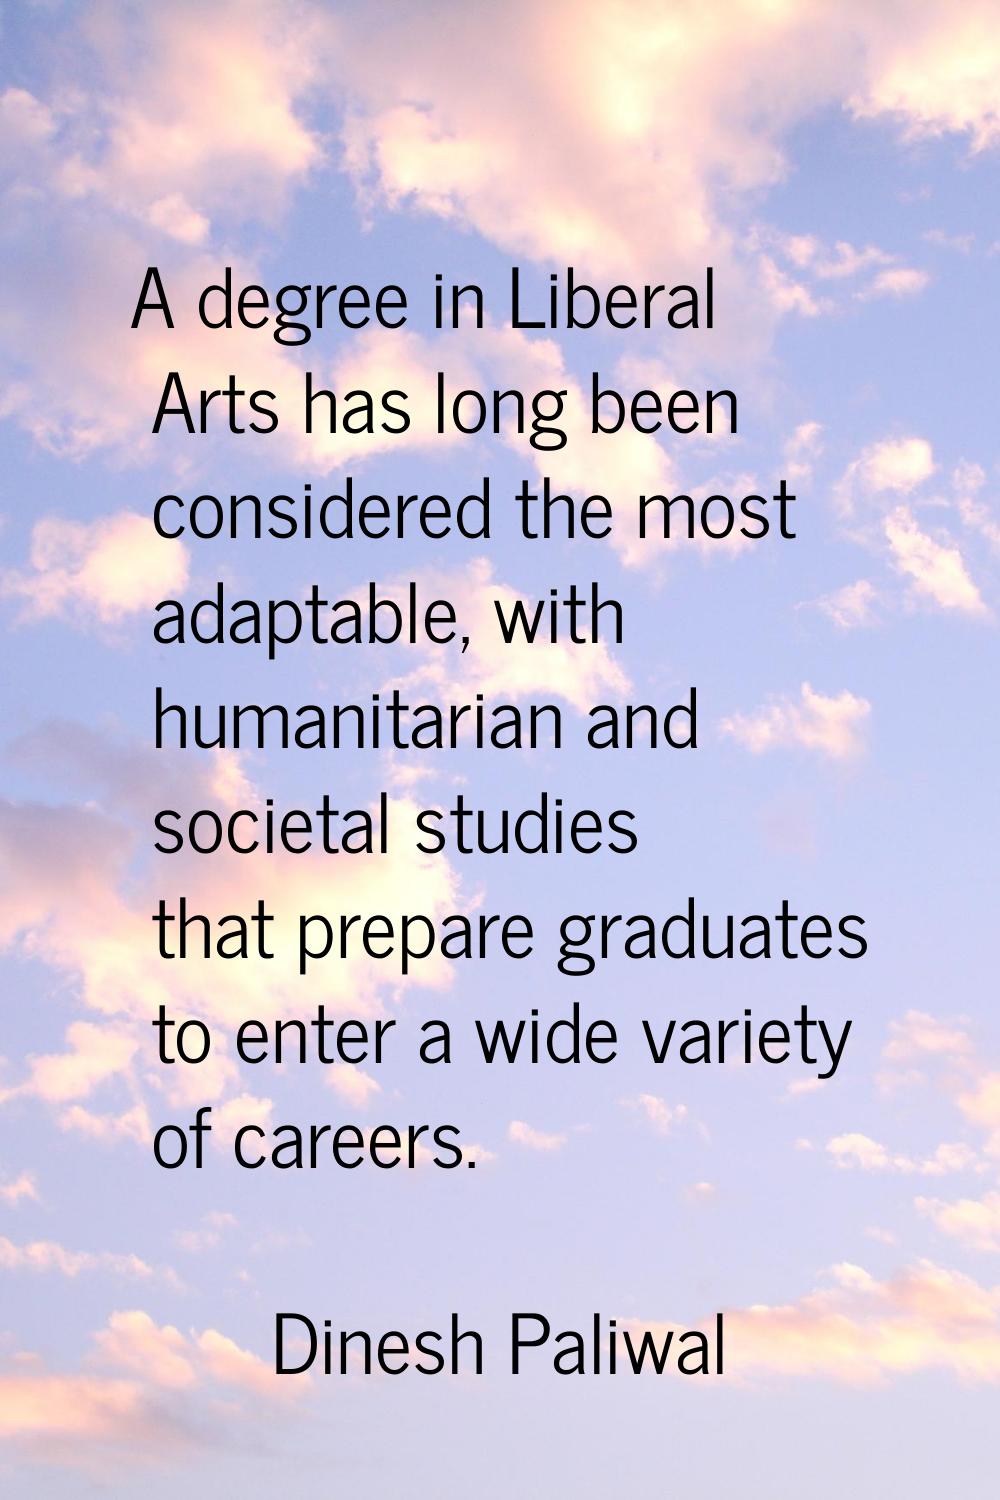 A degree in Liberal Arts has long been considered the most adaptable, with humanitarian and societa